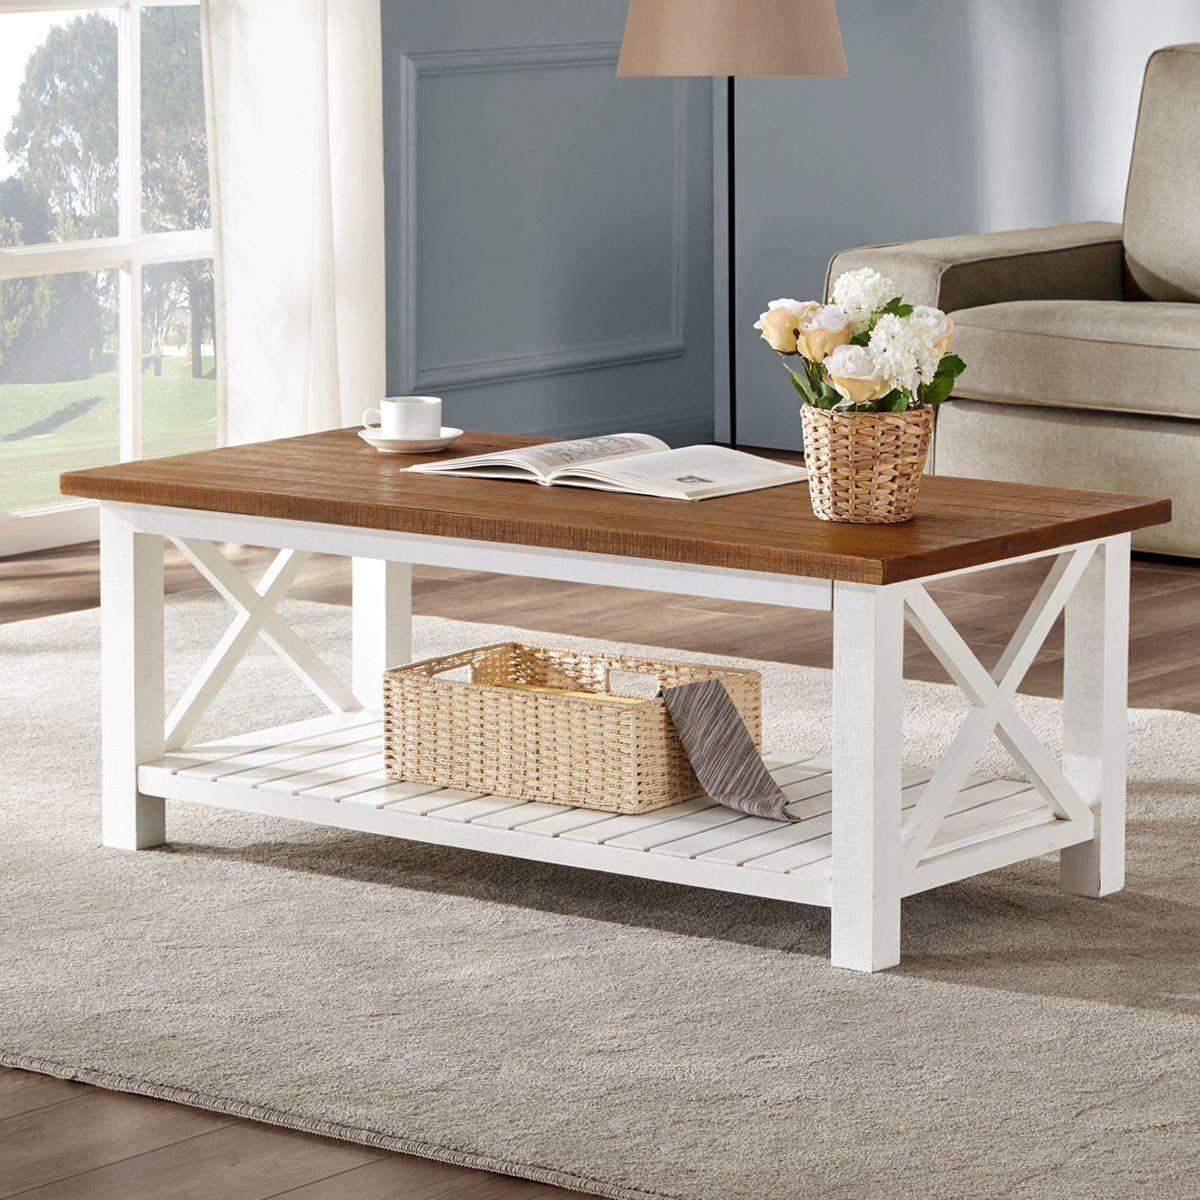 The 10 Best Farmhouse Coffee Tables (for Any Budget) For Living Room Farmhouse Coffee Tables (Photo 2 of 15)